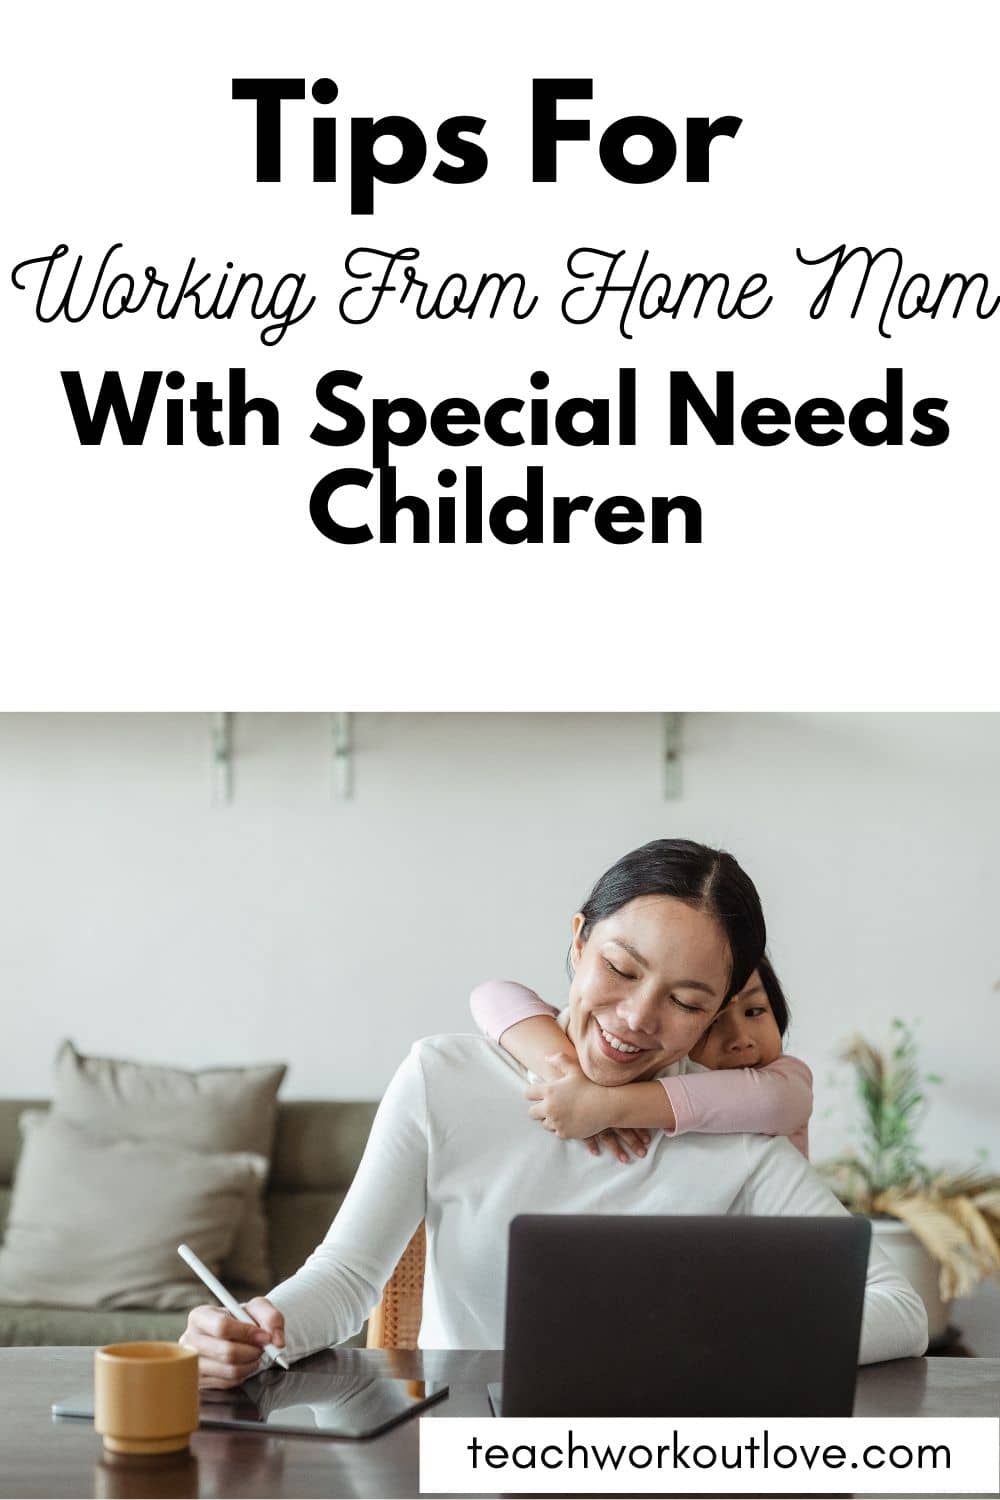 Tips for Working From Home Mom With Special Needs Children - teach.workout.love